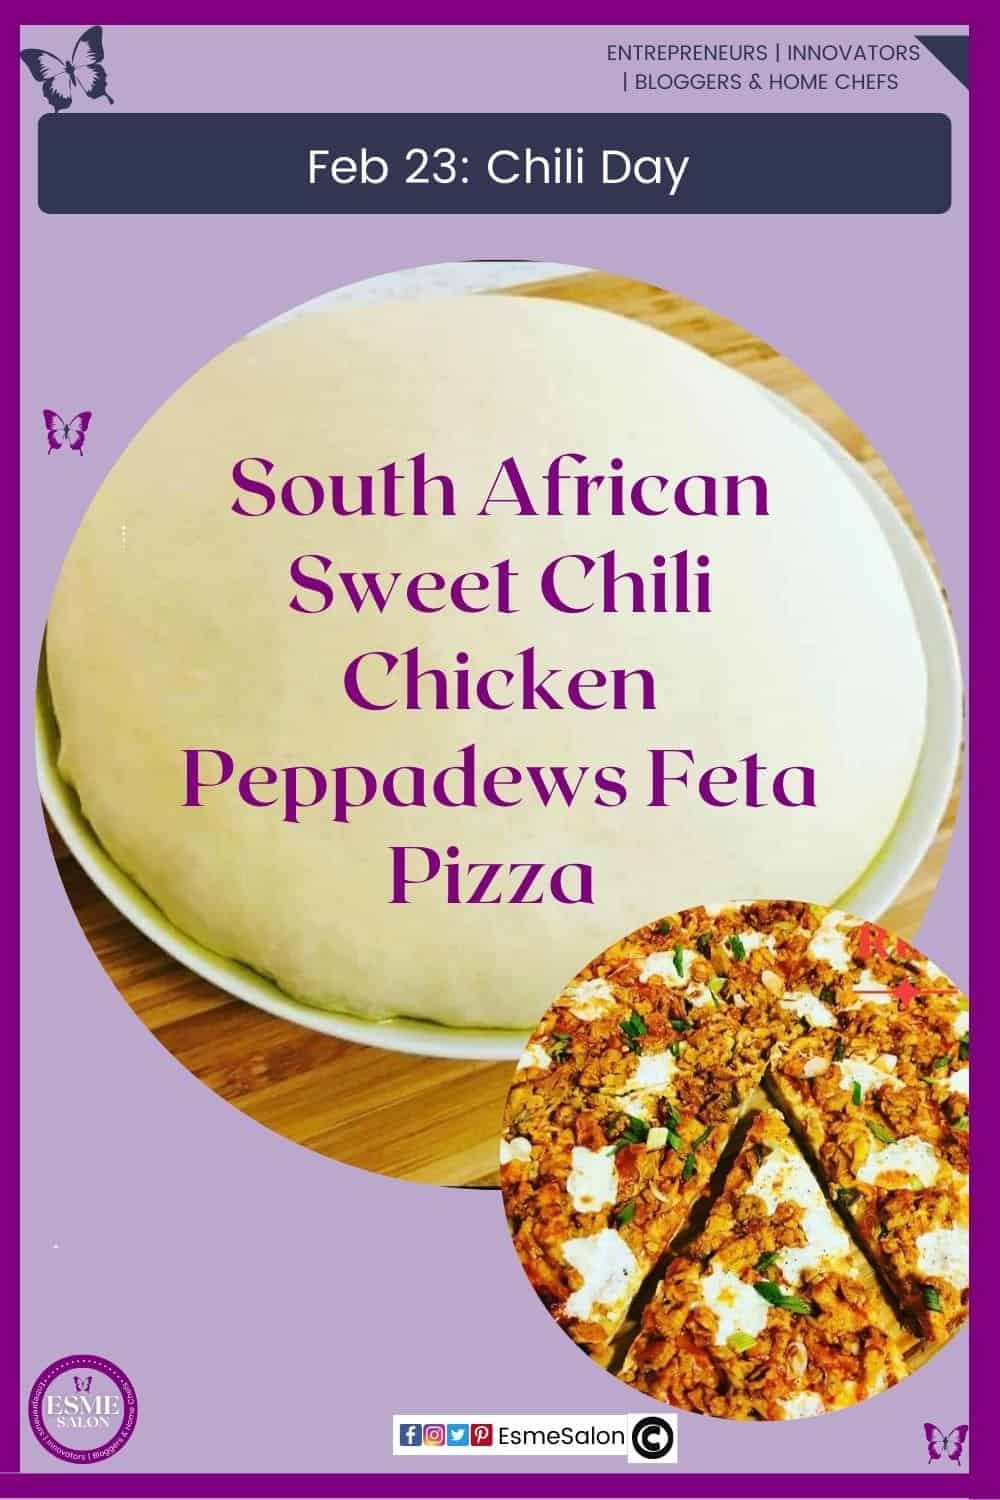 an image of Pizza dough and prepared South African Sweet Chili Chicken Peppadews Feta Pizza